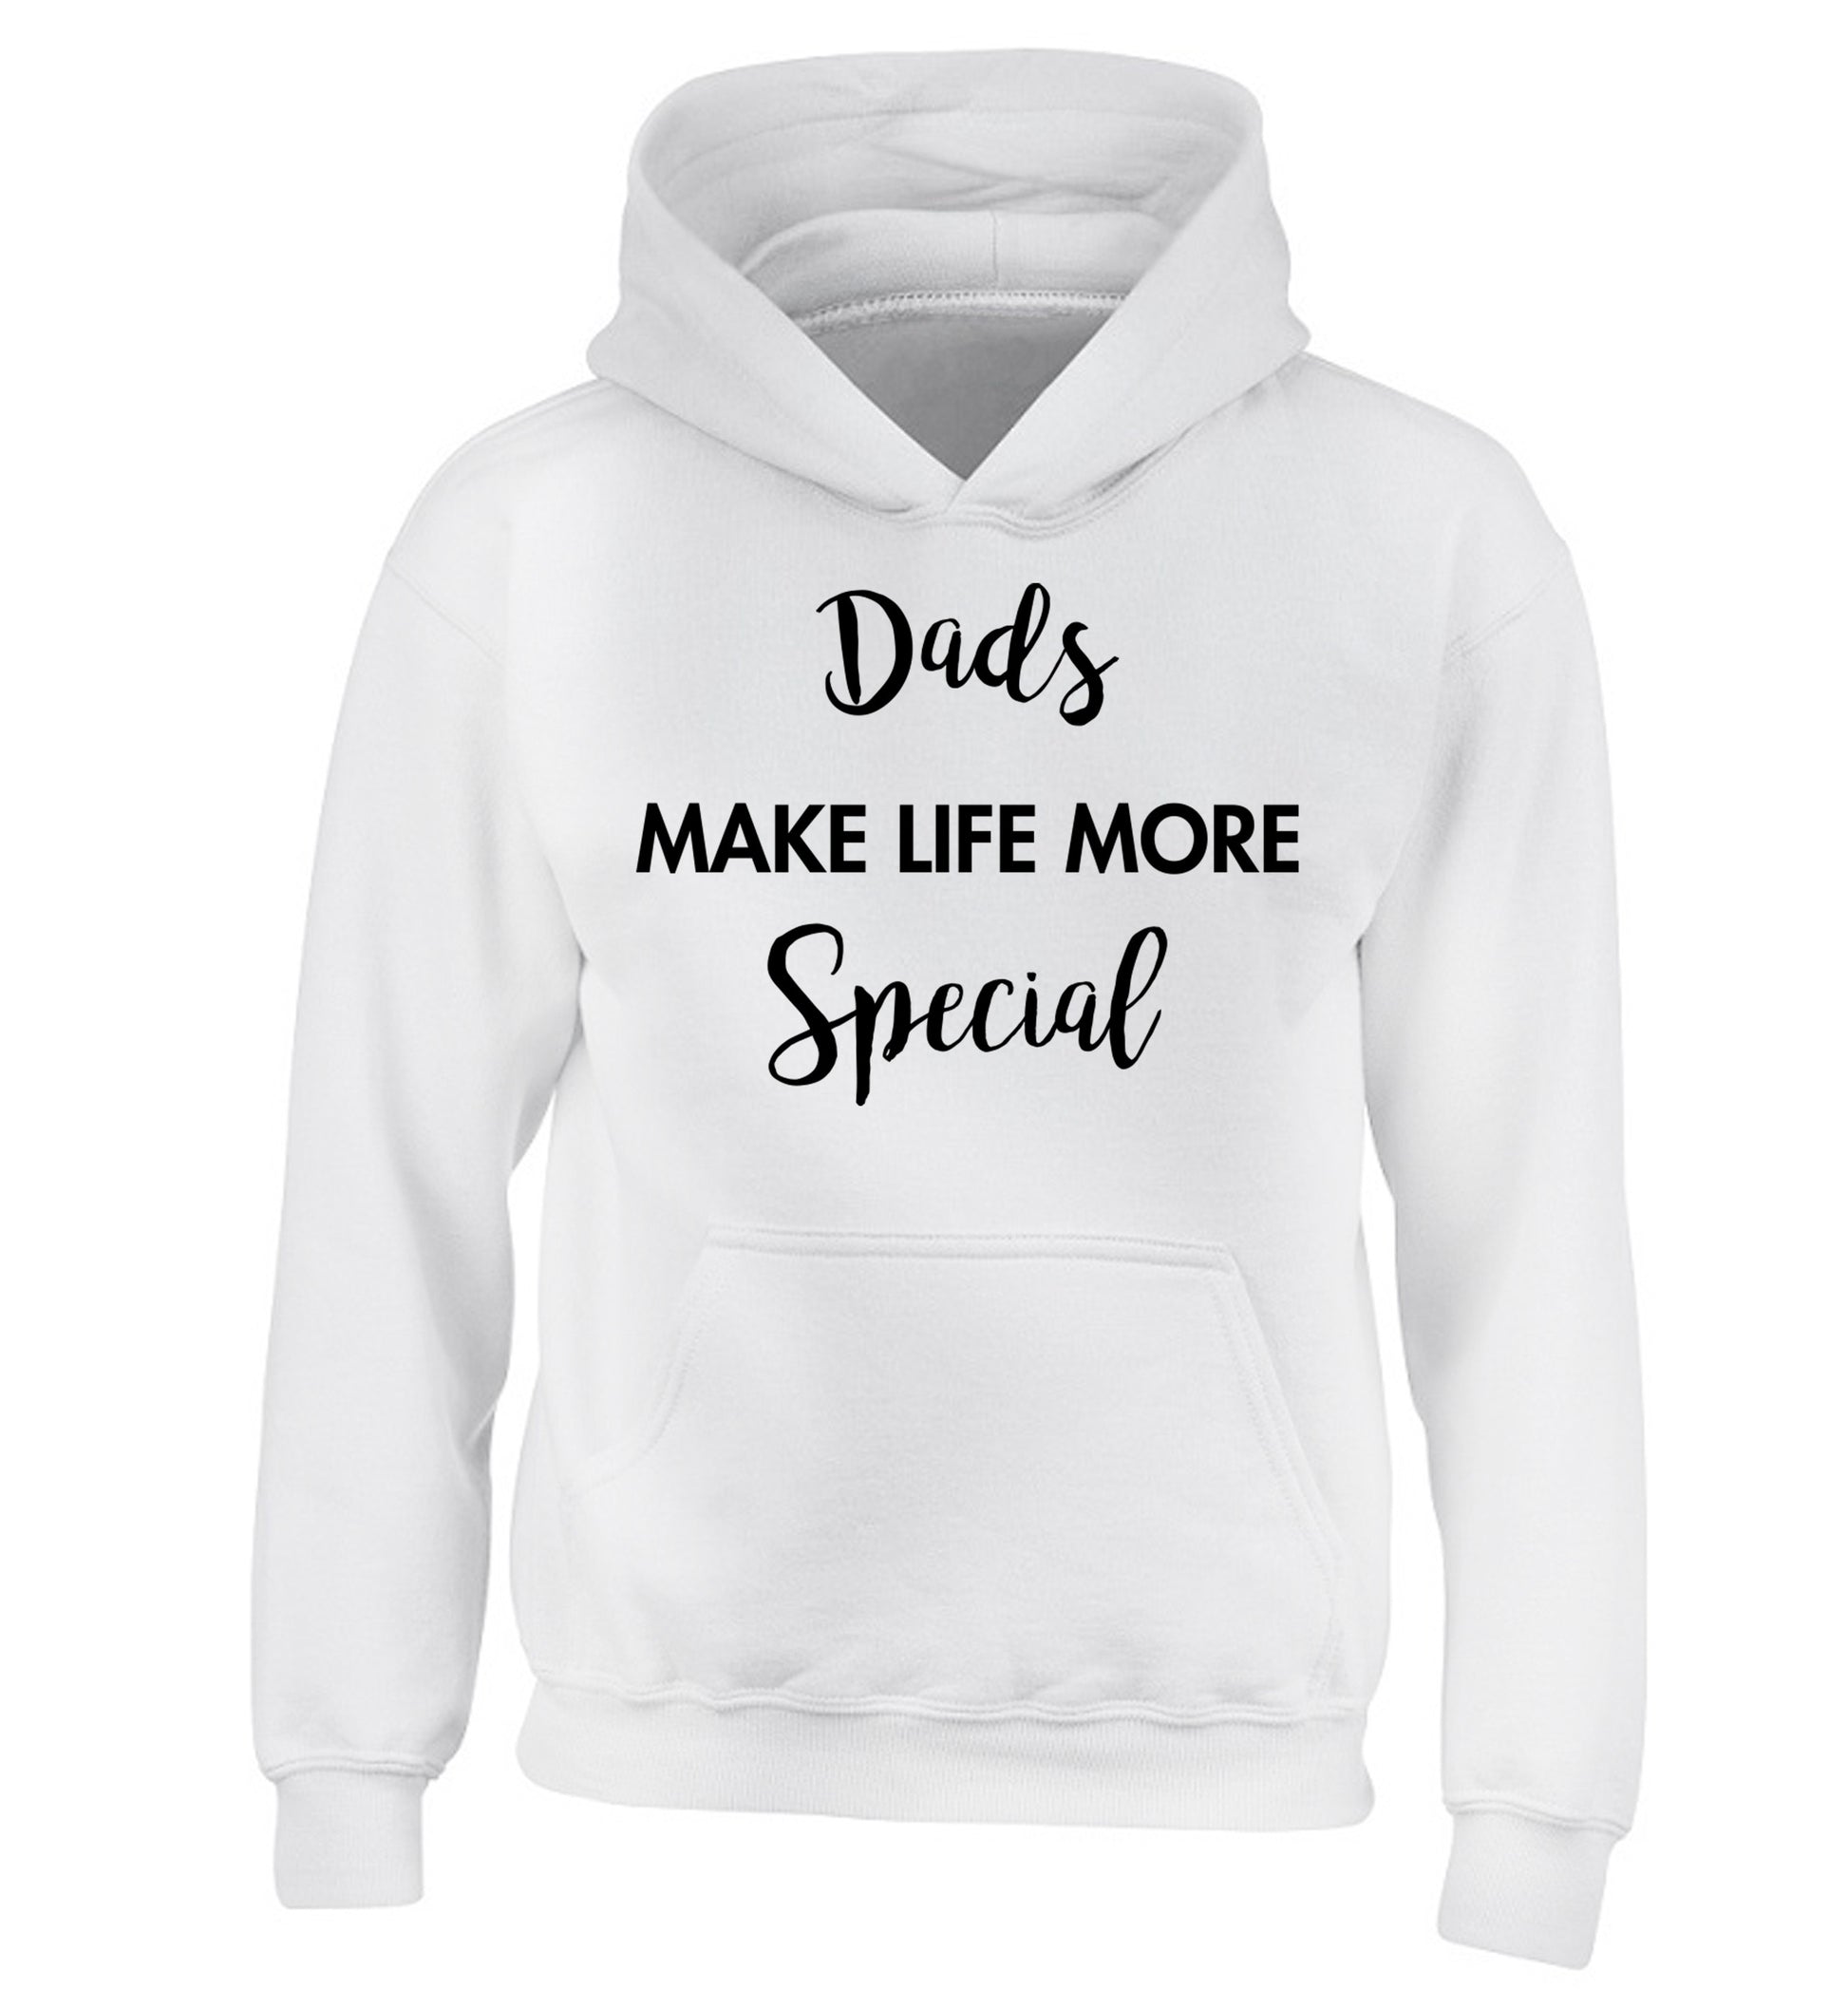 Dads make life more special children's white hoodie 12-14 Years